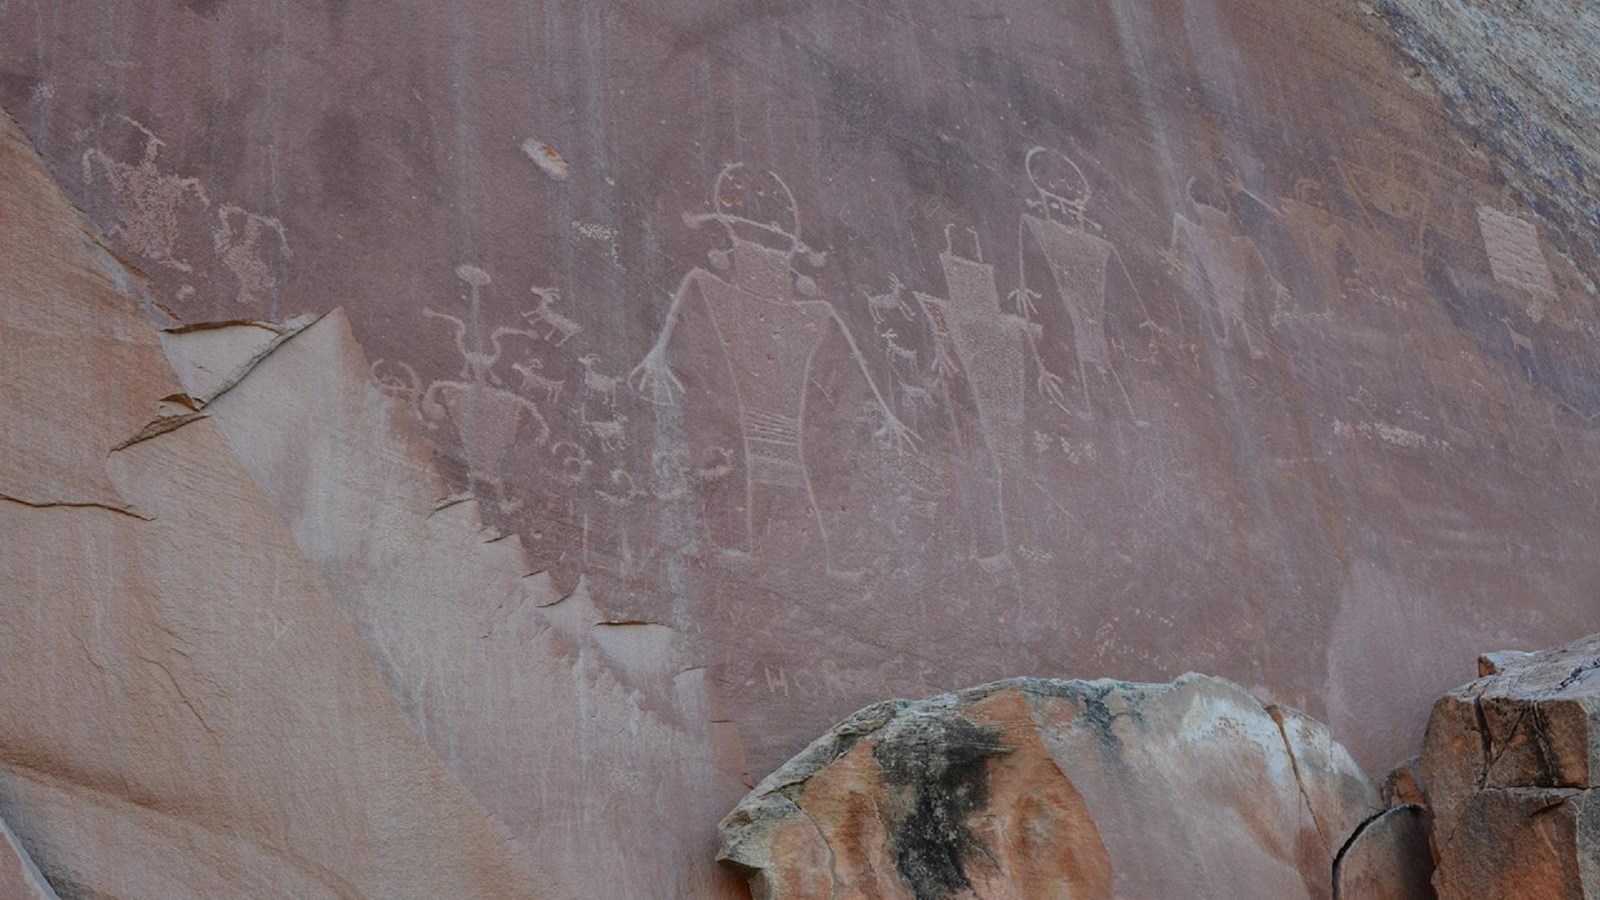 Rock markings carved into flat red rock depicting human-like figures with trapezoidal bodies.